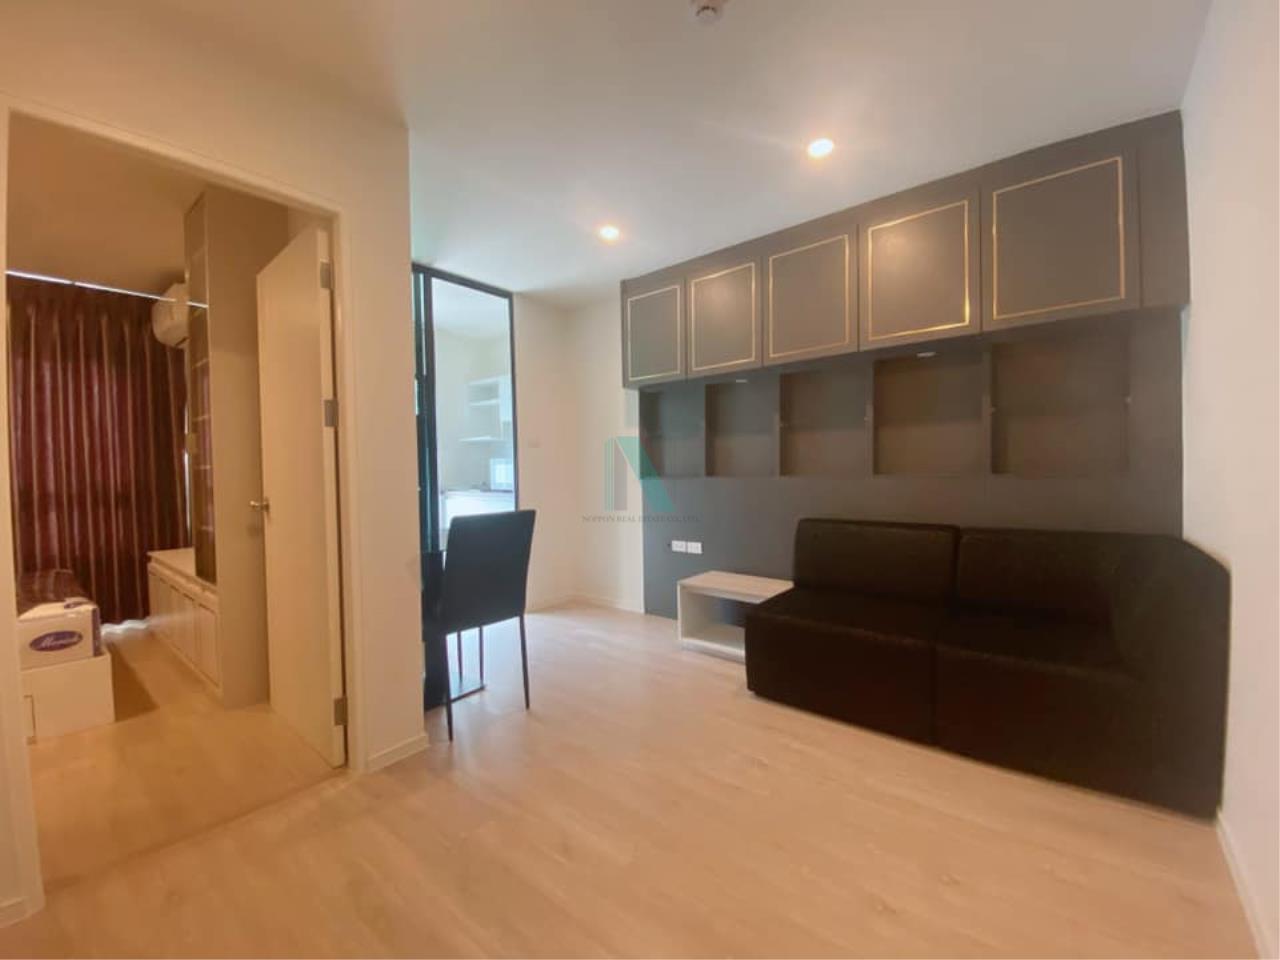 For Rent I Condo Green Space Sukhumvit 77 Phase 2 1 Bedroom 5th Floor Building A